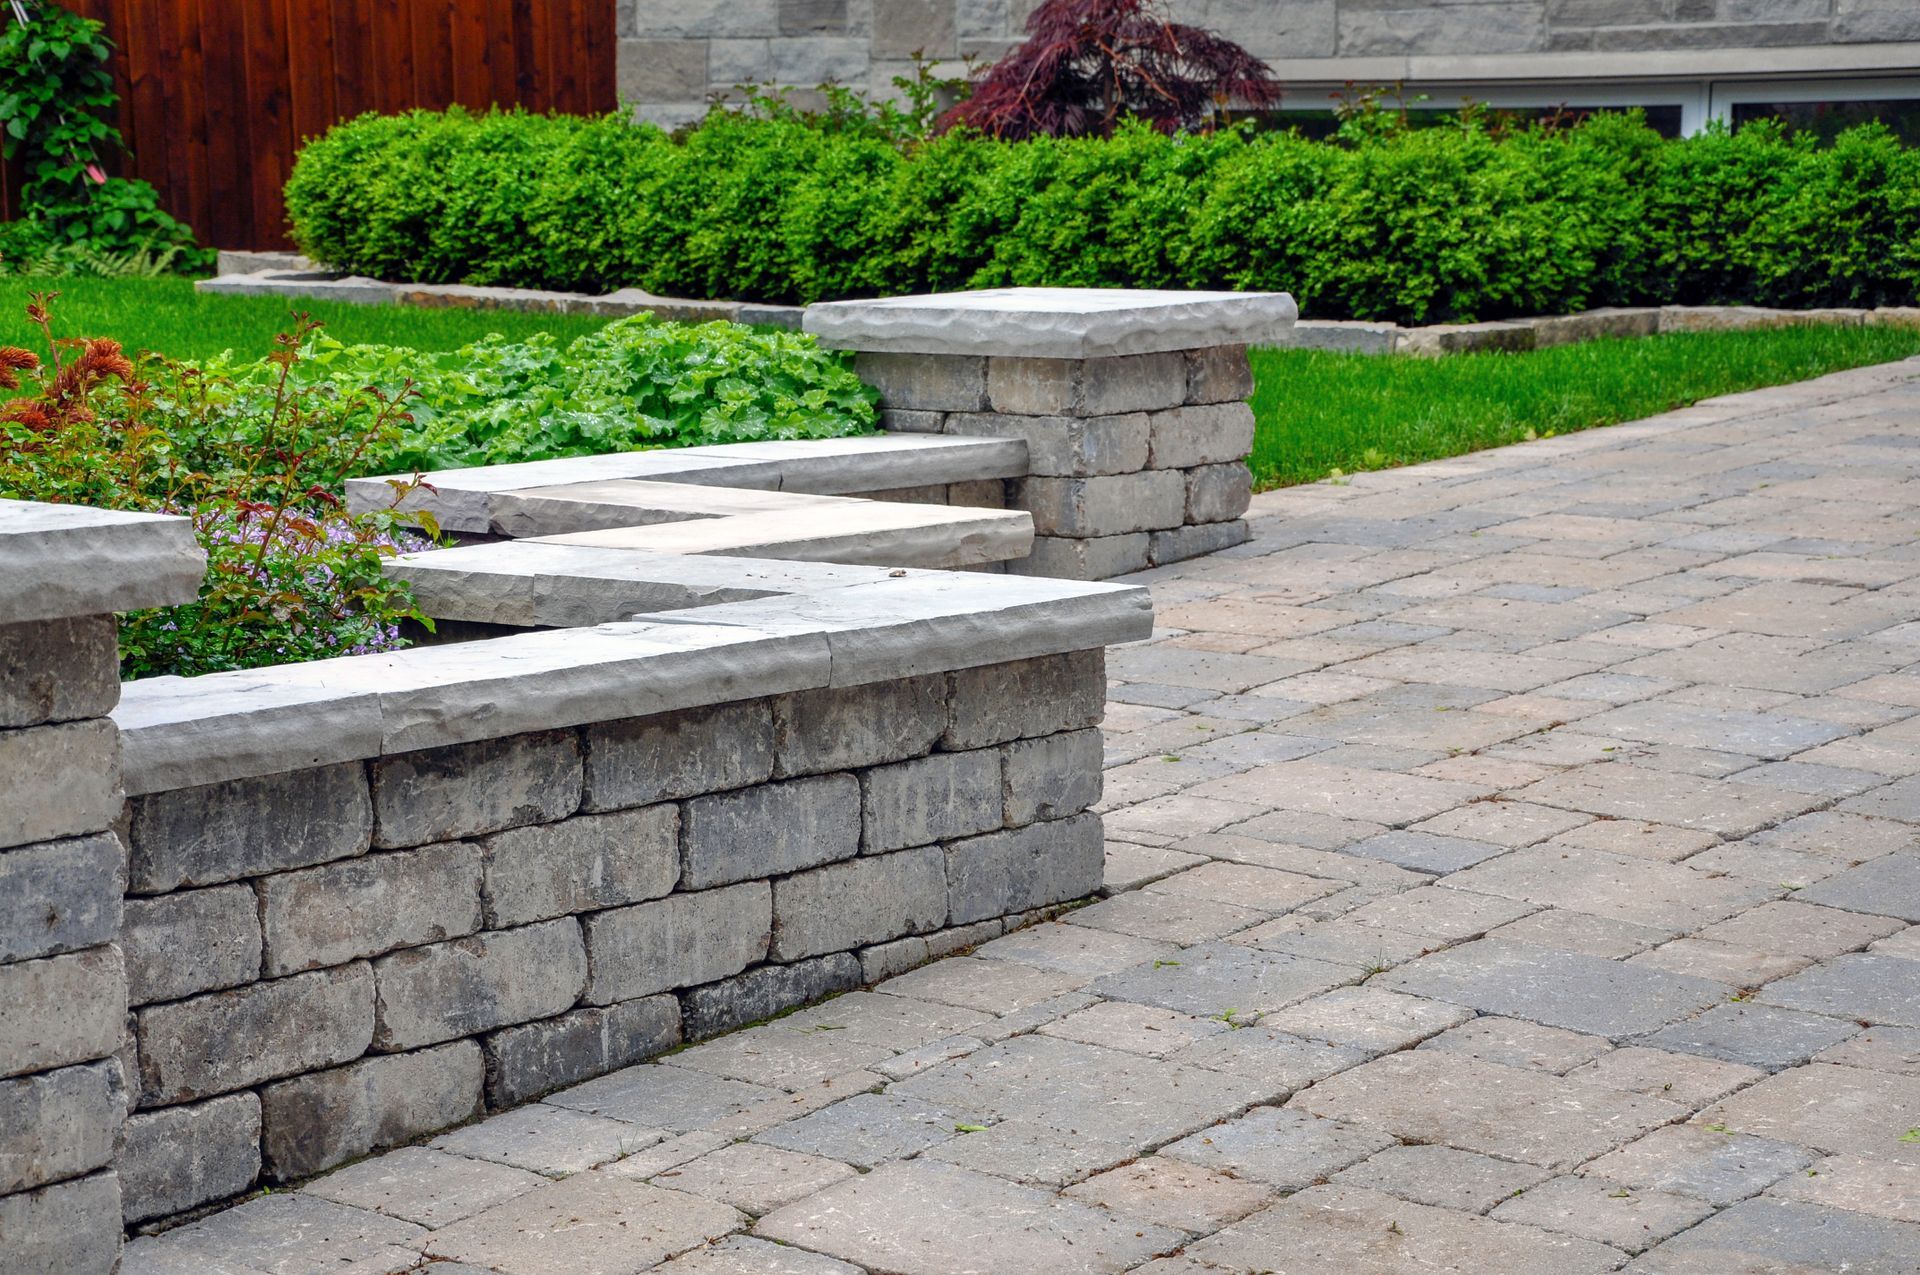 An elegant seat wall with sturdy pillars and a natural stone coping that gracefully defines a rustic tumbled paver driveway, serving both functional and aesthetic purposes in the landscape design.